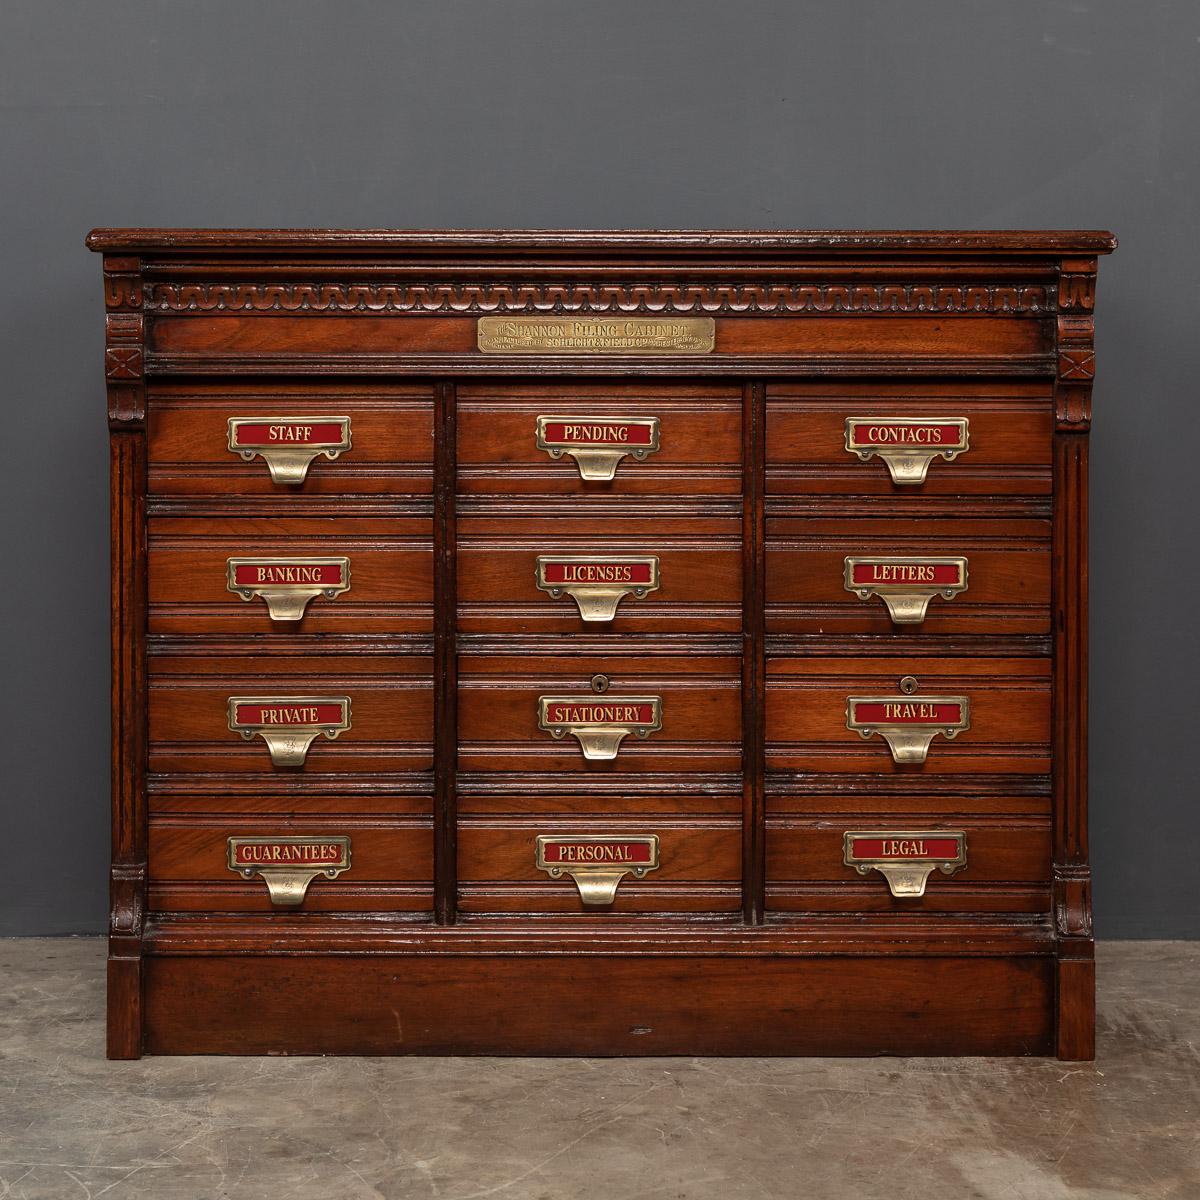 Antique early 20th century hand crafted mahogany filing cabinet, 'The Shannon Filing Cabinet, manufactured, patented by Schlight & Field Co, Rochester NY USA'. This piece has twelve retractable drawers with original brass hook handles, each draw is